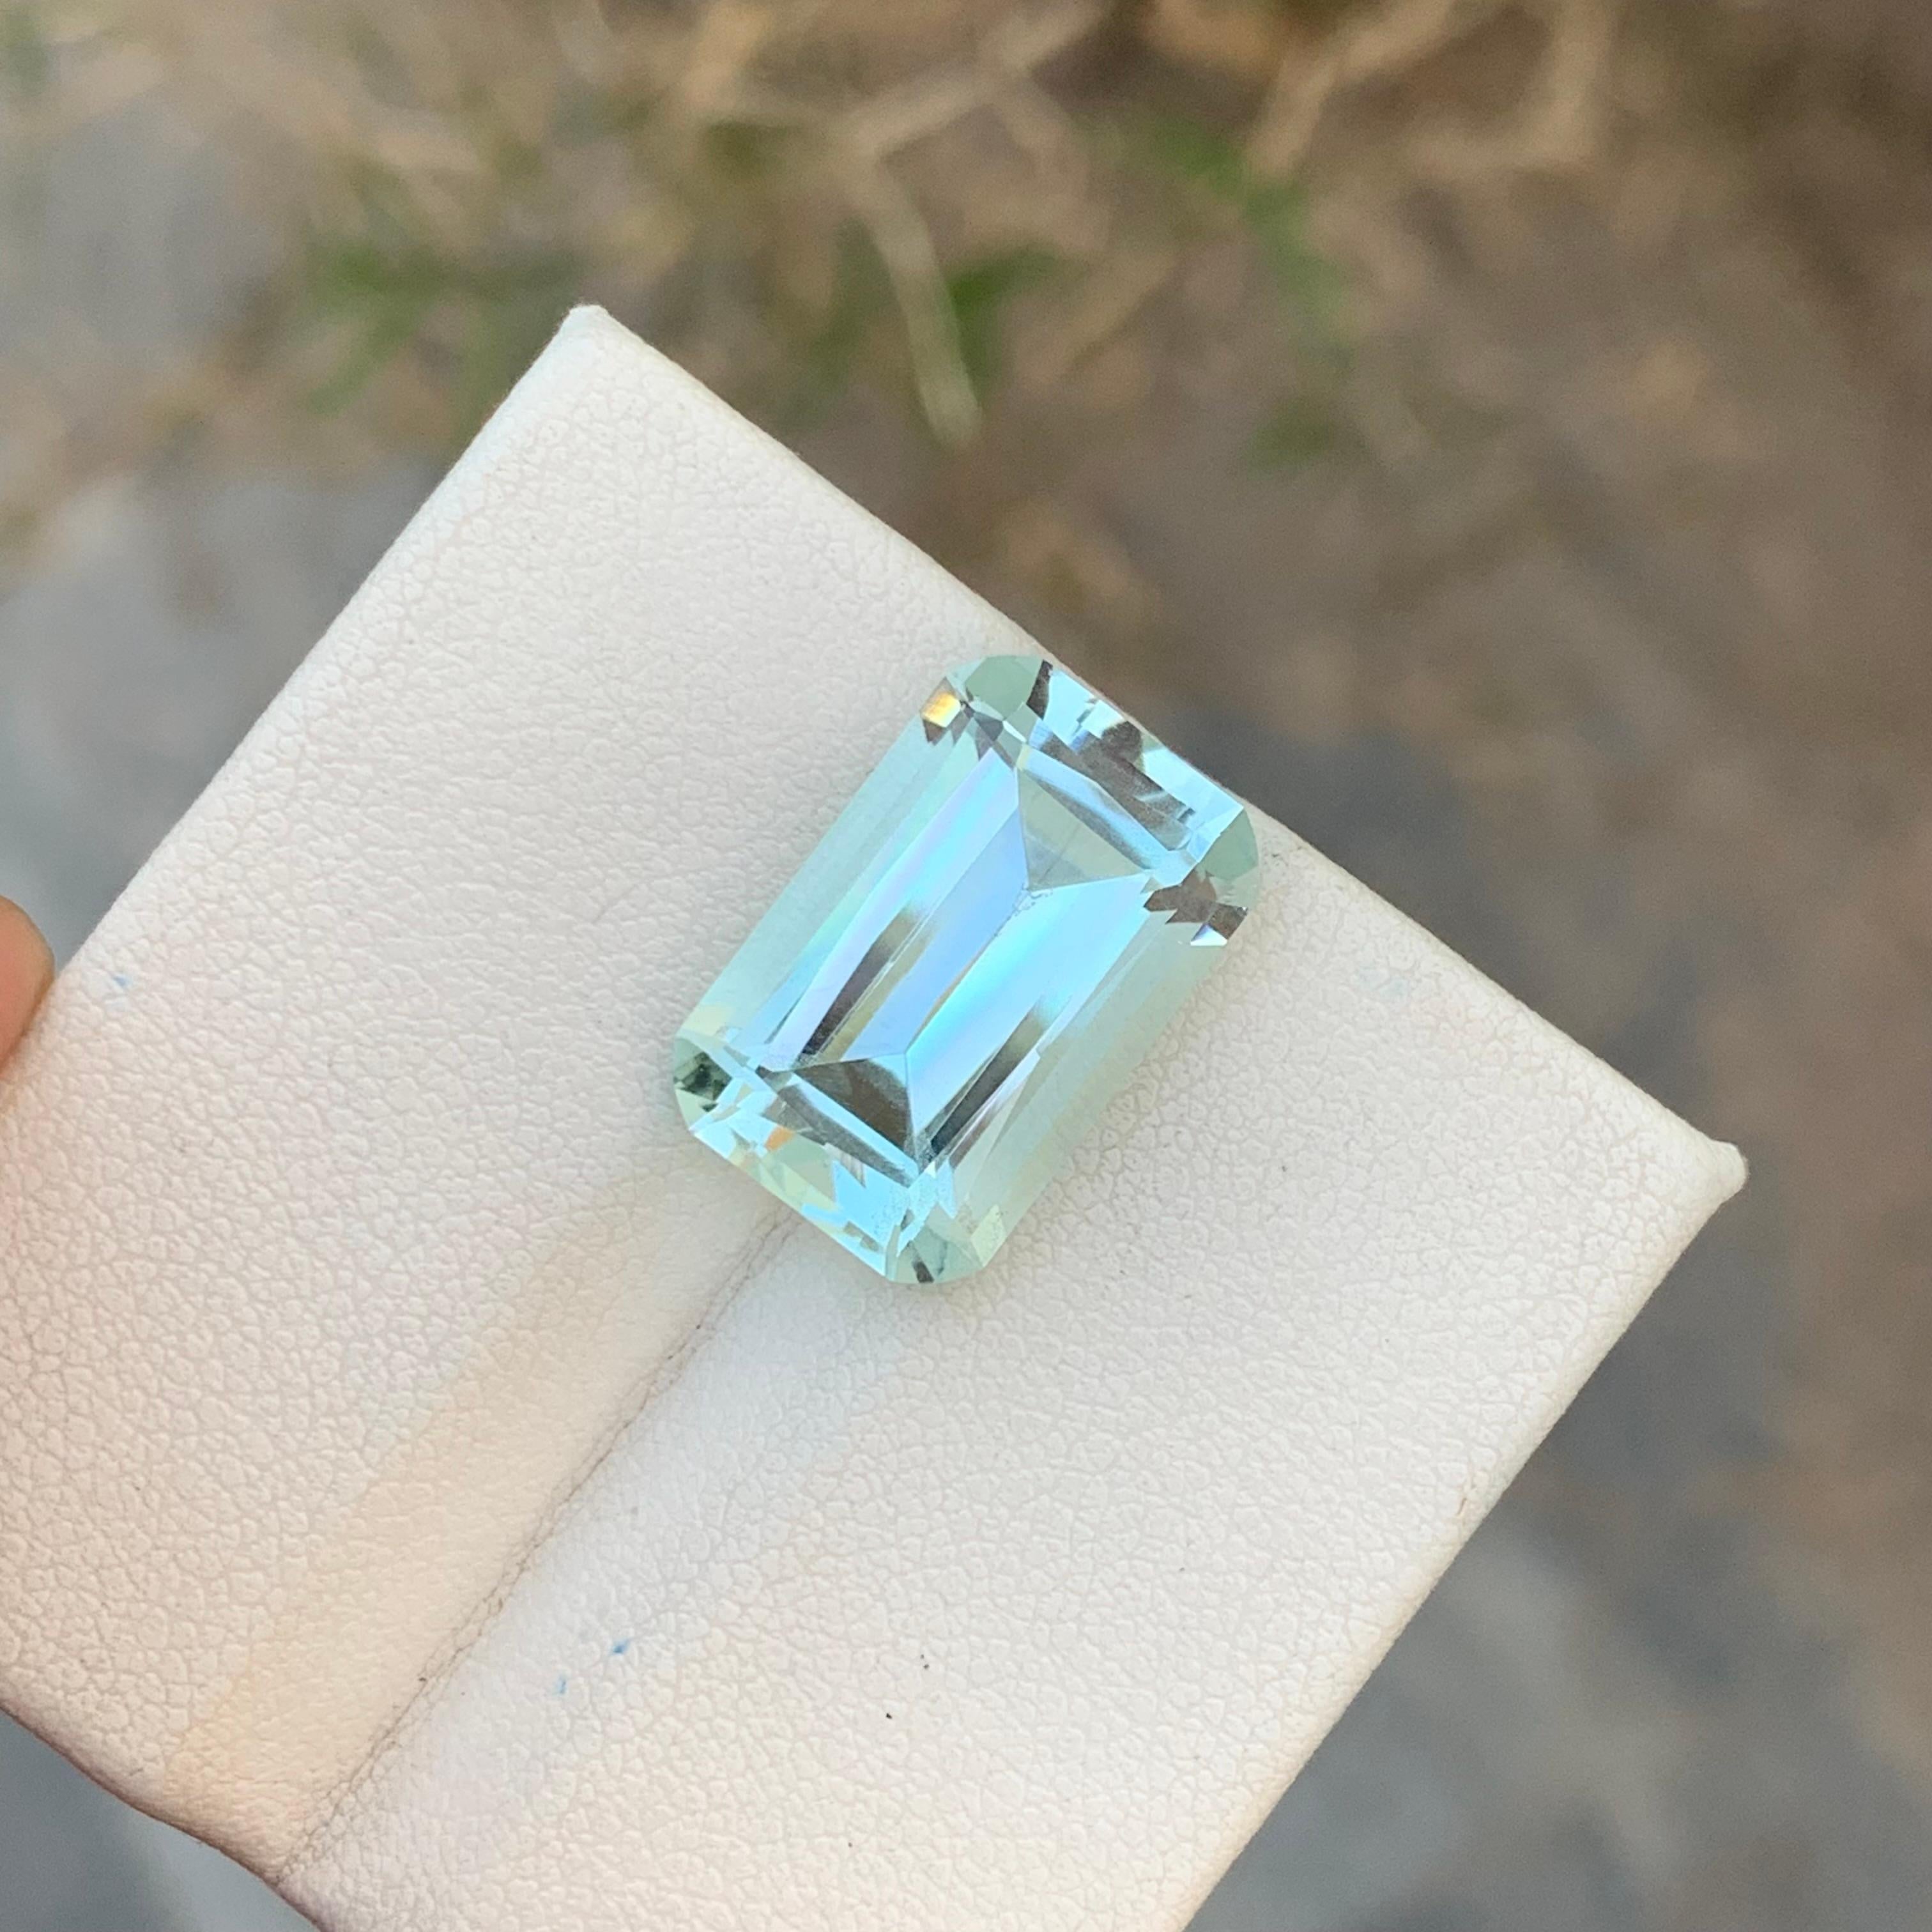 Loose Aquamarine
Weight: 9.45 Carat
Dimension: 16.6 x 10.8 x 7.4 Mm
Colour : Blue and white
Origin: Shigar Valley, Pakistan
Treatment: Non
Certificate : On Demand
Shape: Emerald 

Aquamarine is a captivating gemstone known for its enchanting